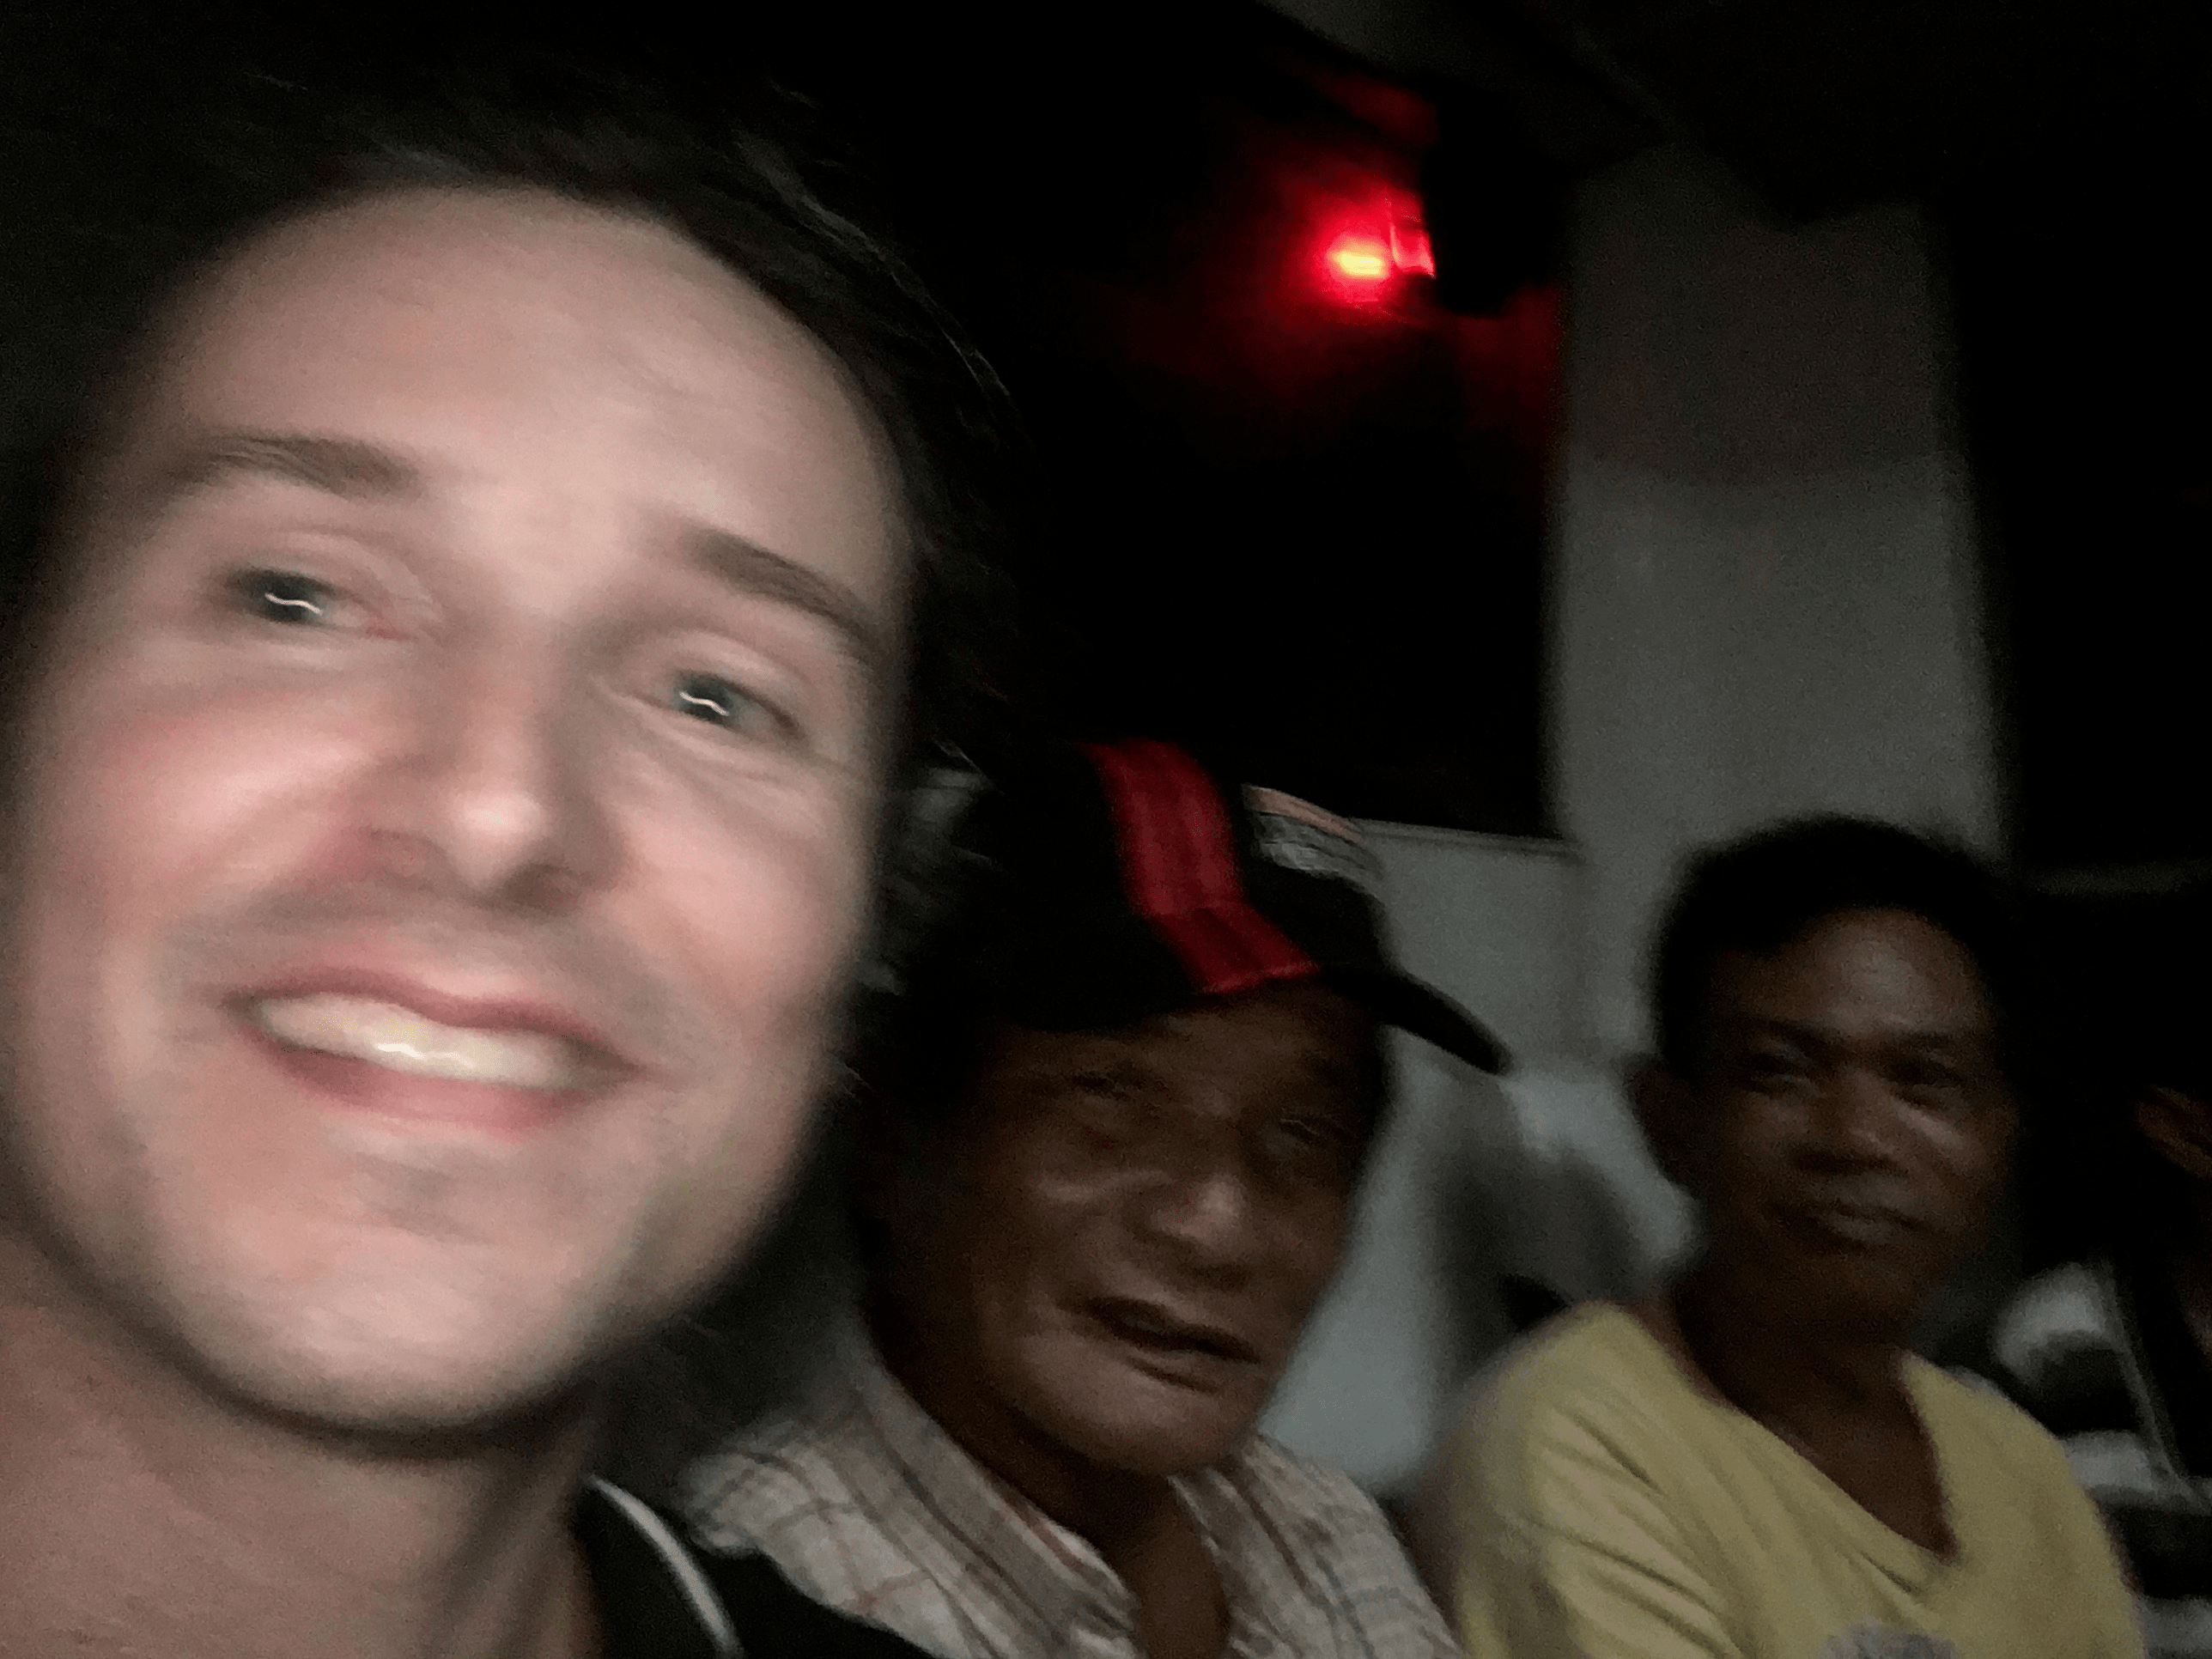 lenny through paradise taking a selfie with filipino men in the bus in the philippines pangasinan